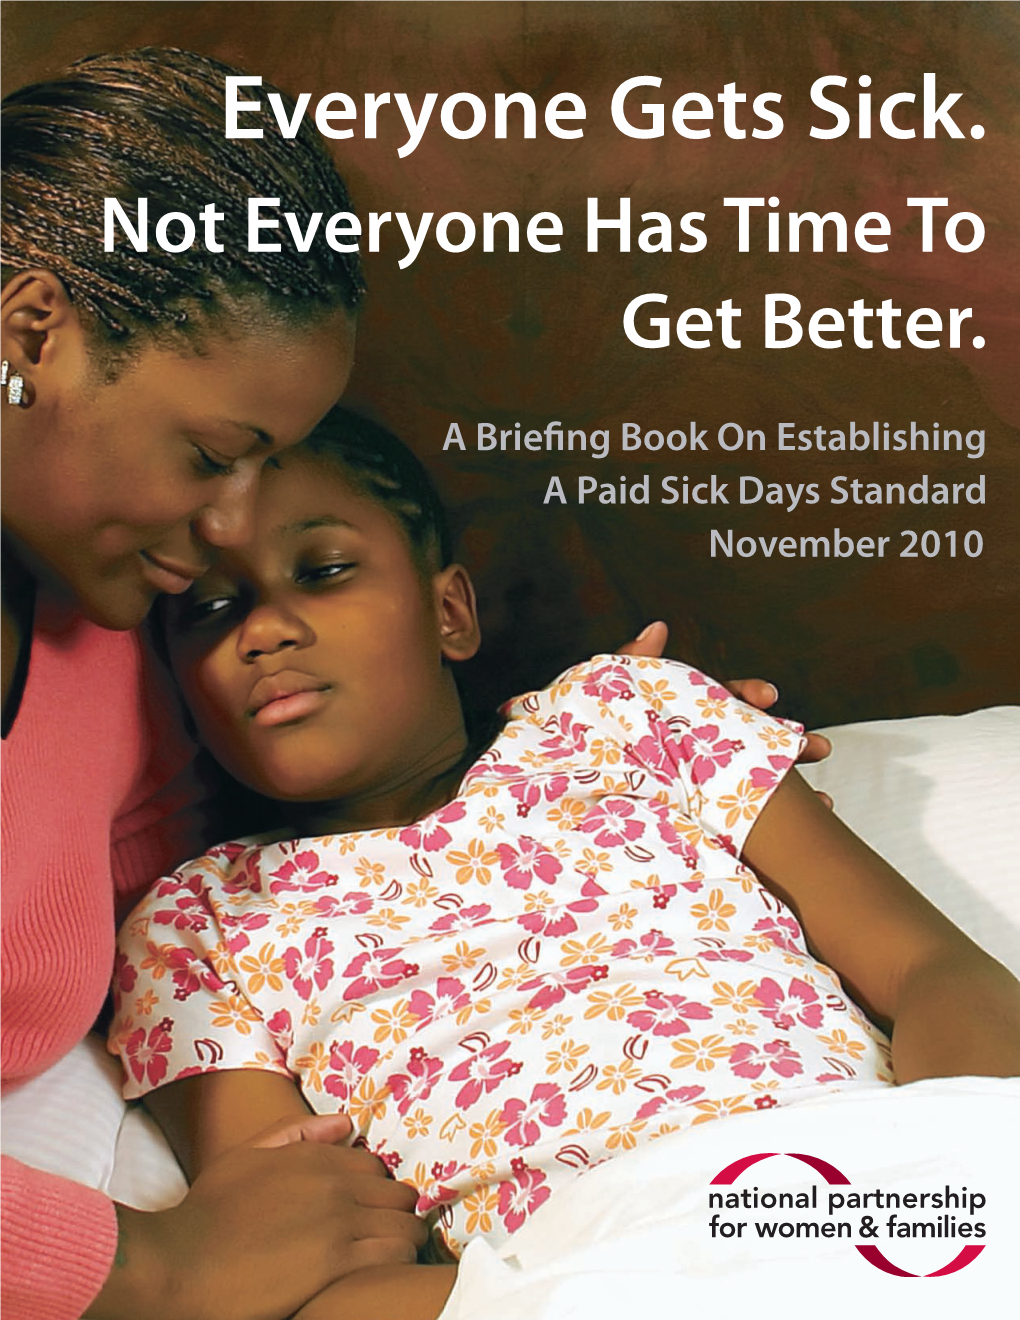 Who Supports a Paid Sick Days Standard?